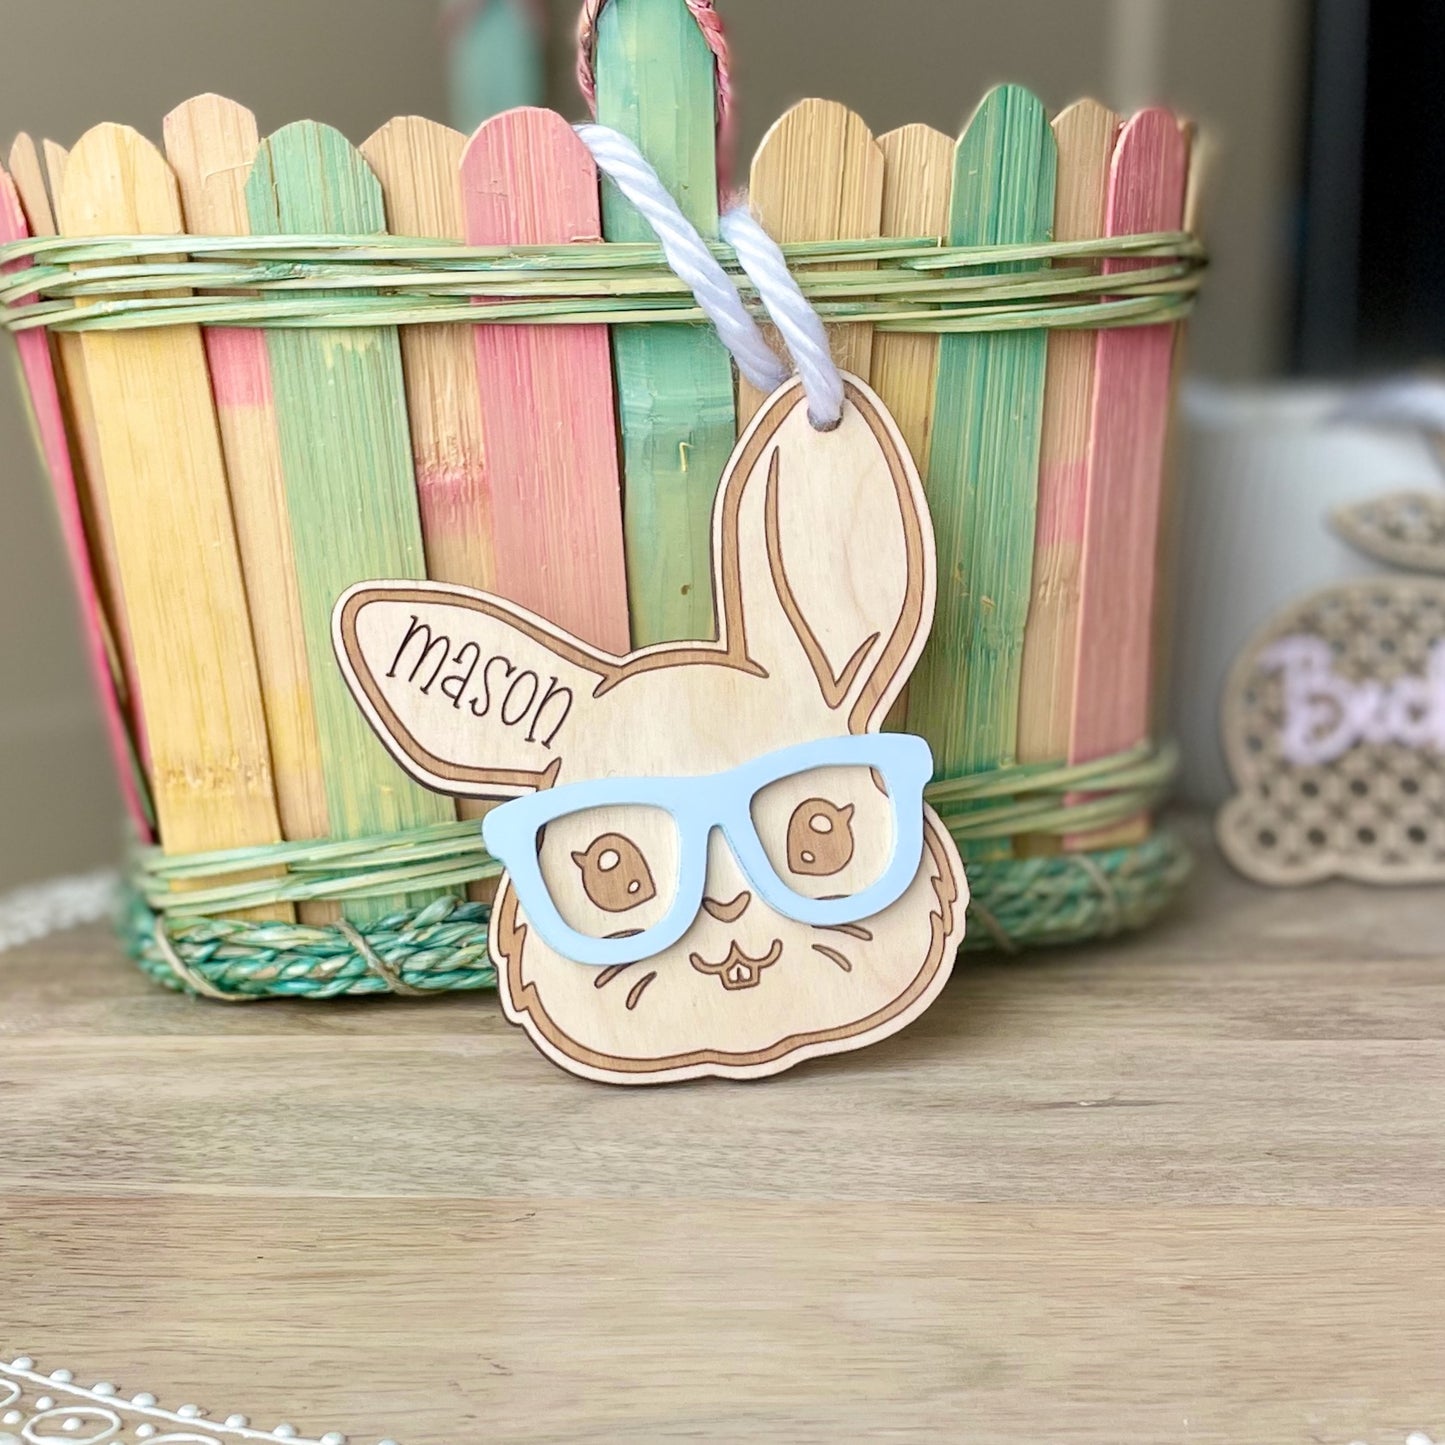 Easter Bunny with Glasses Personalized Basket Name Tag